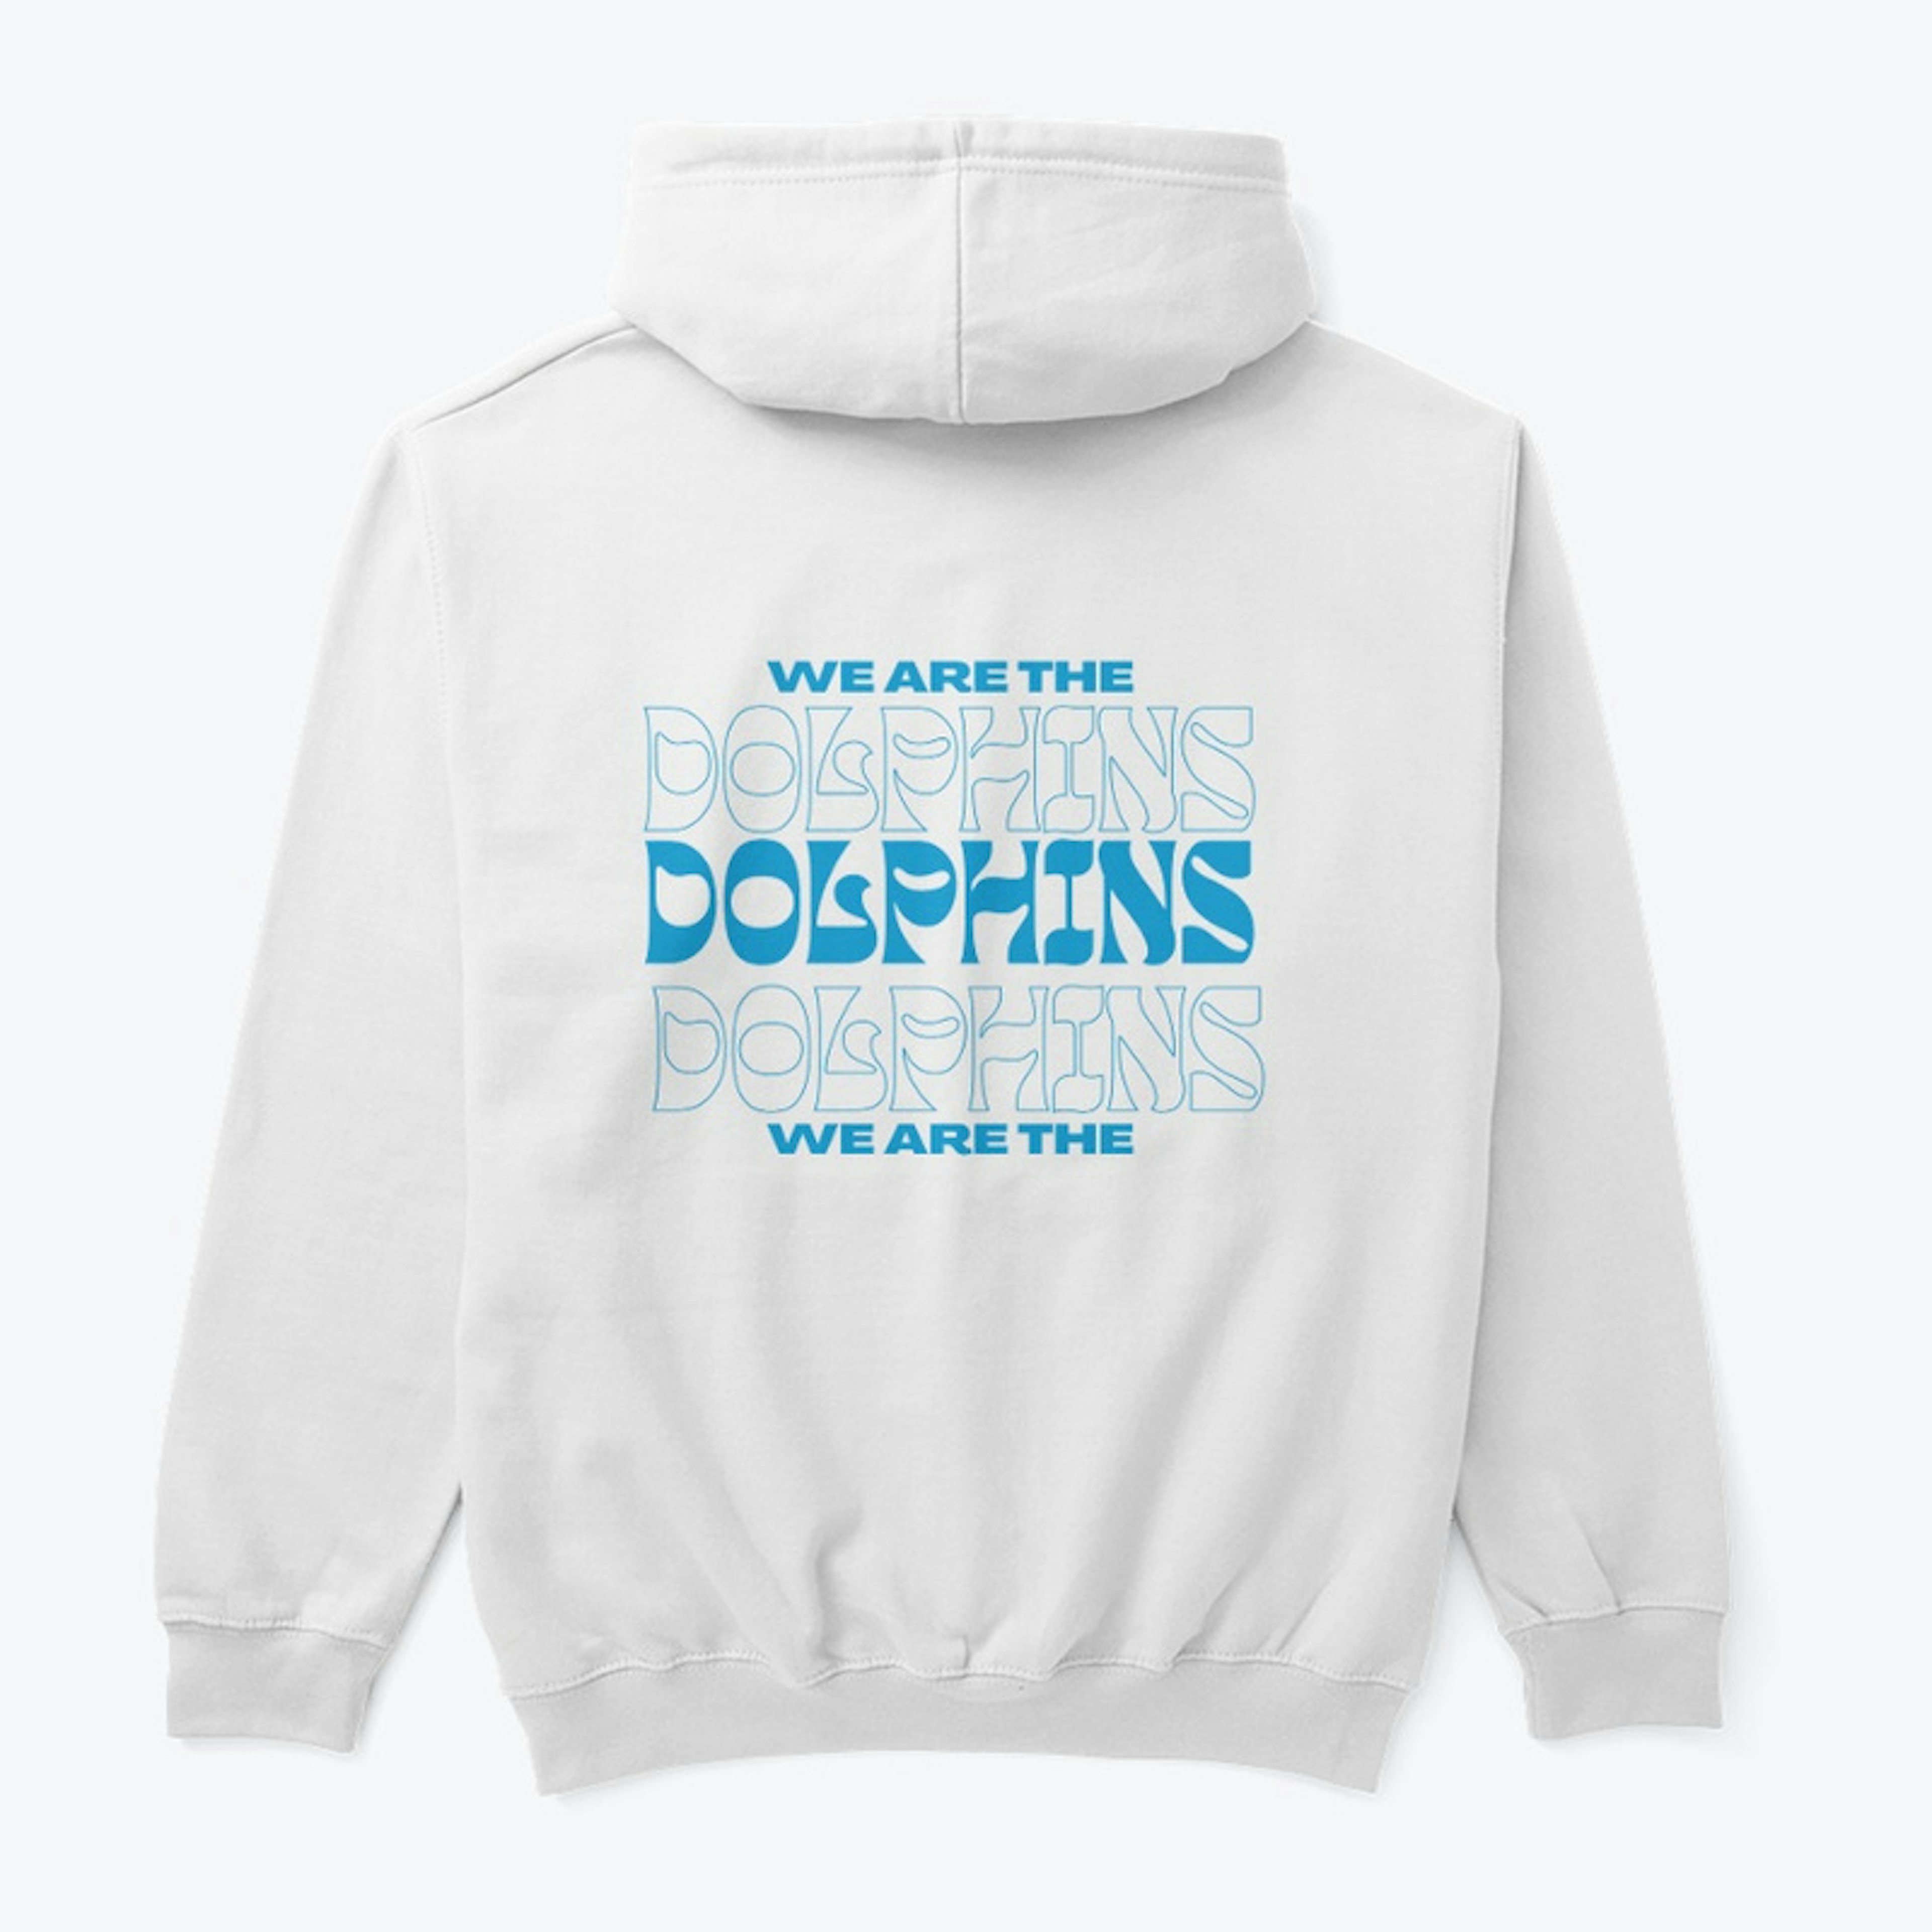 We are the Dolphins